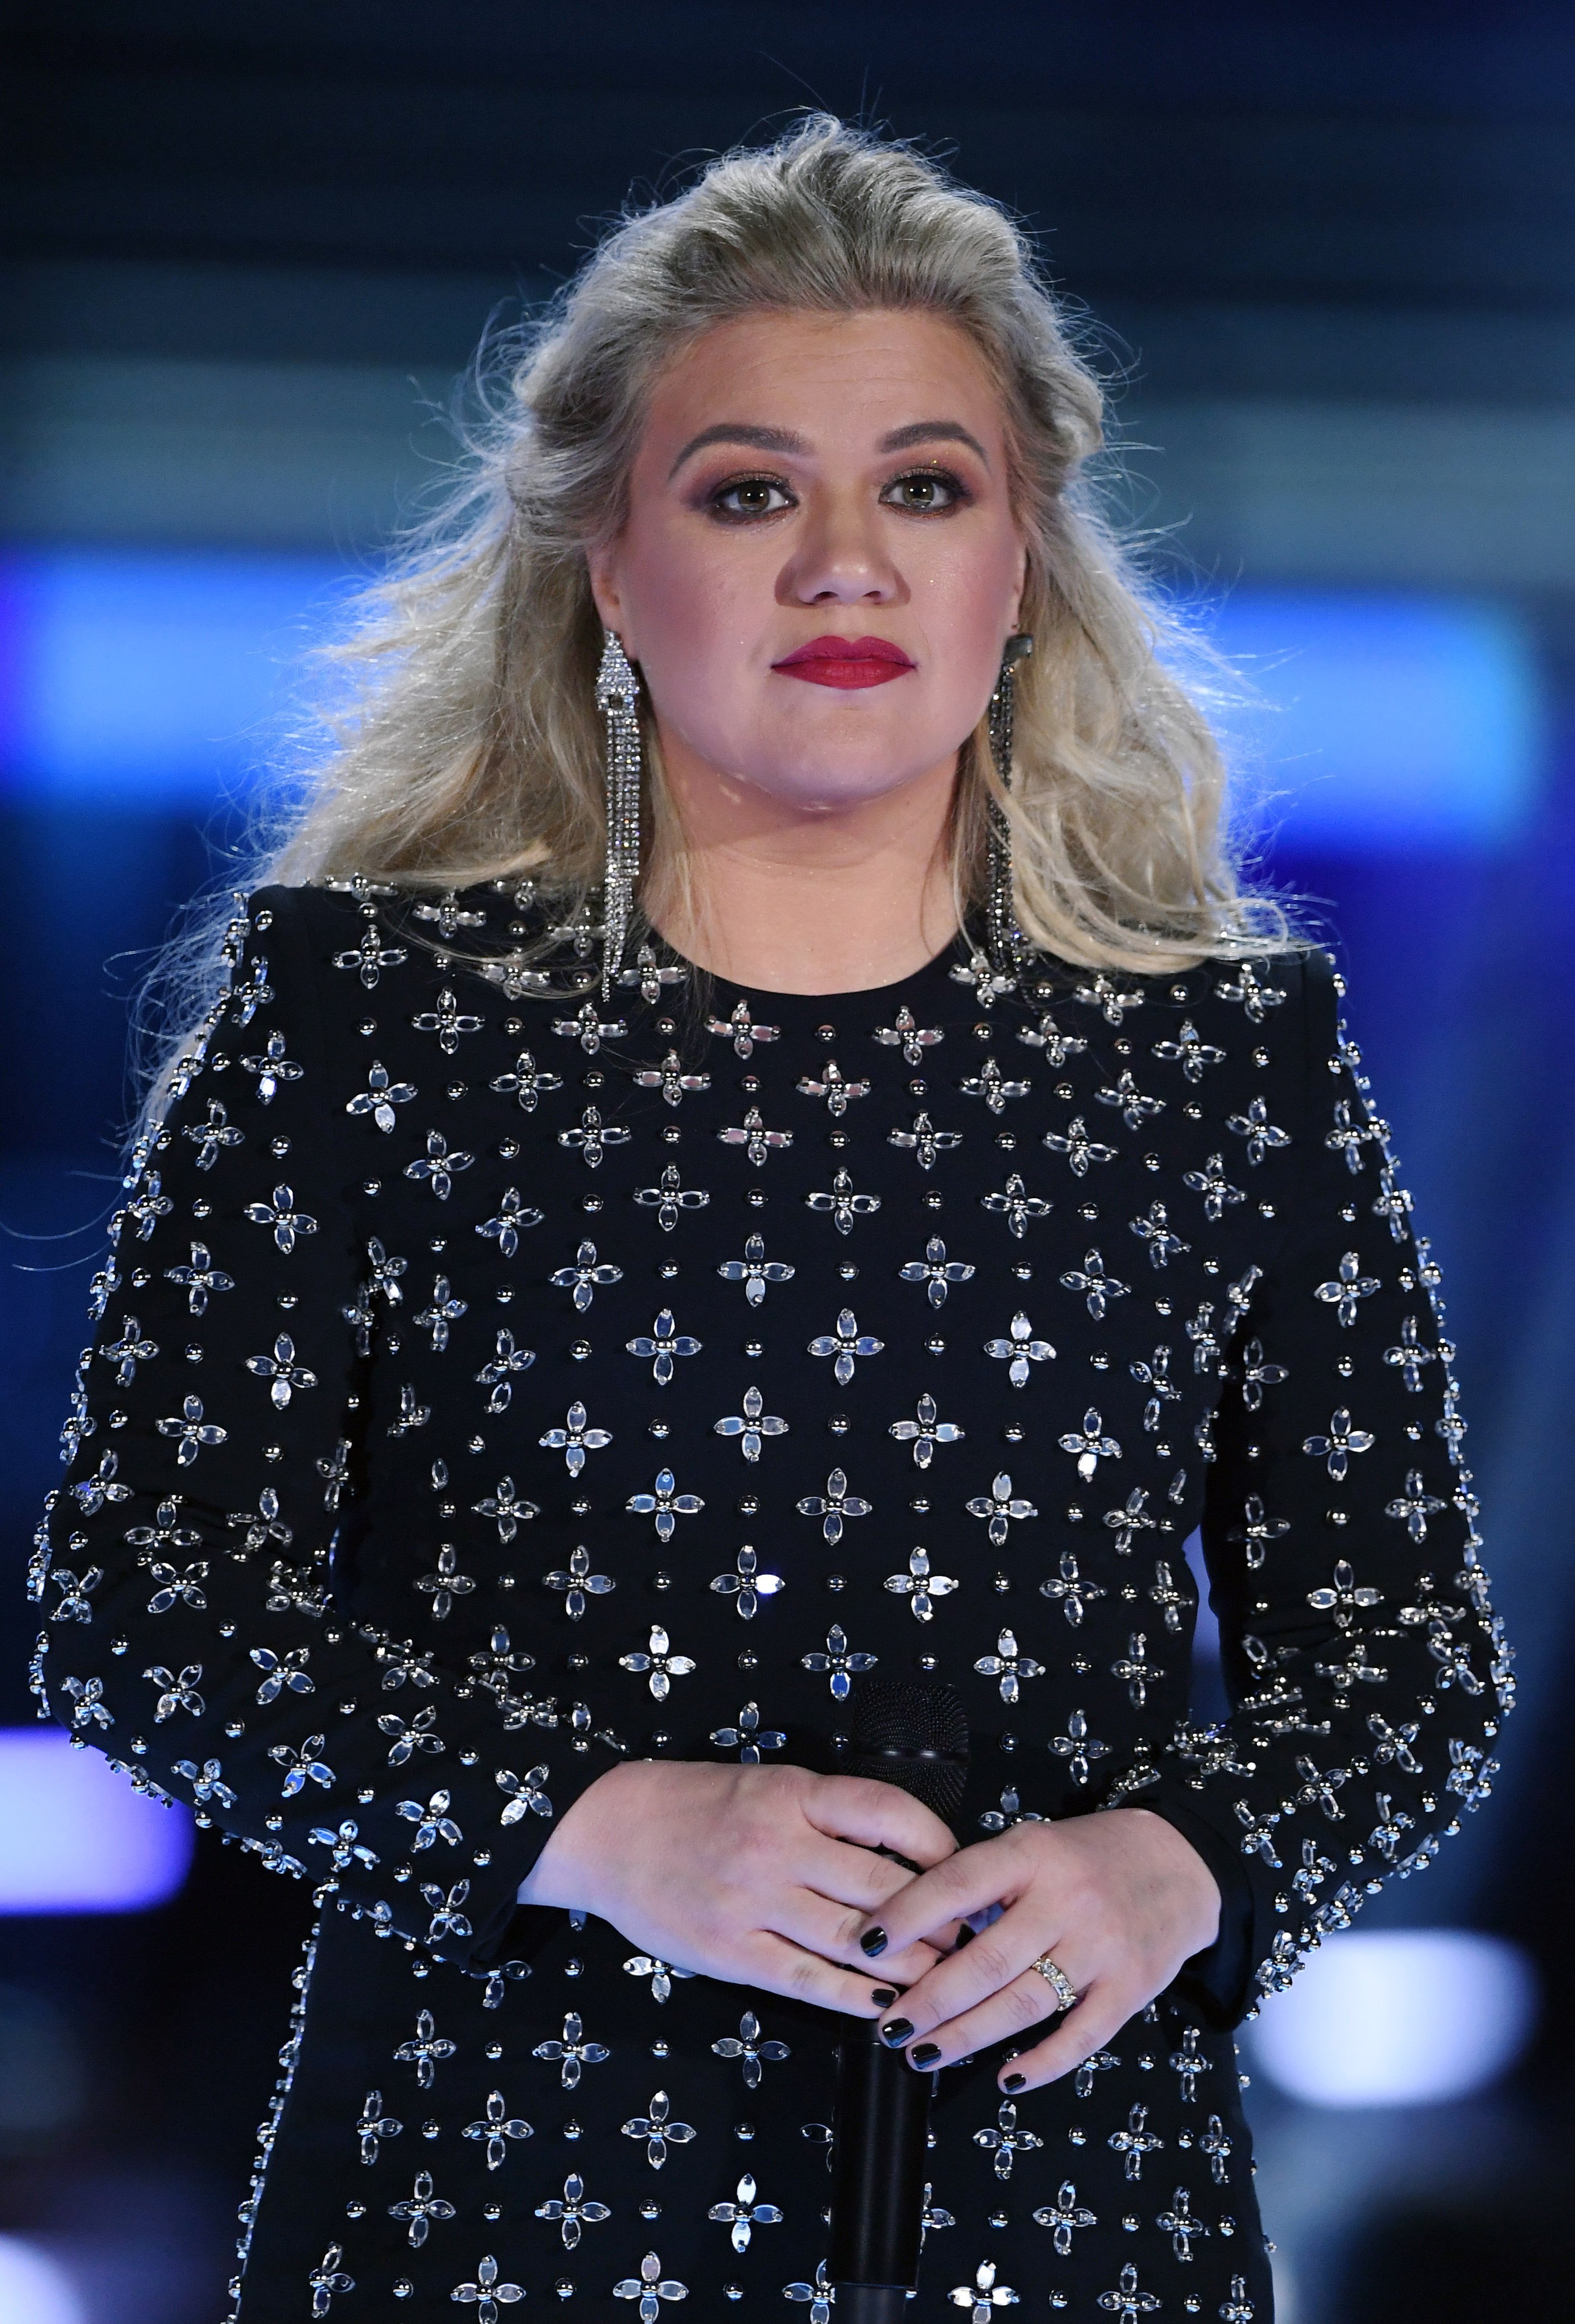 Kelly Clarkson during hosting of the 2019 Billboard Music Awards in Las Vegas, Nevada on May 1, 2019 | Photo: Getty Images